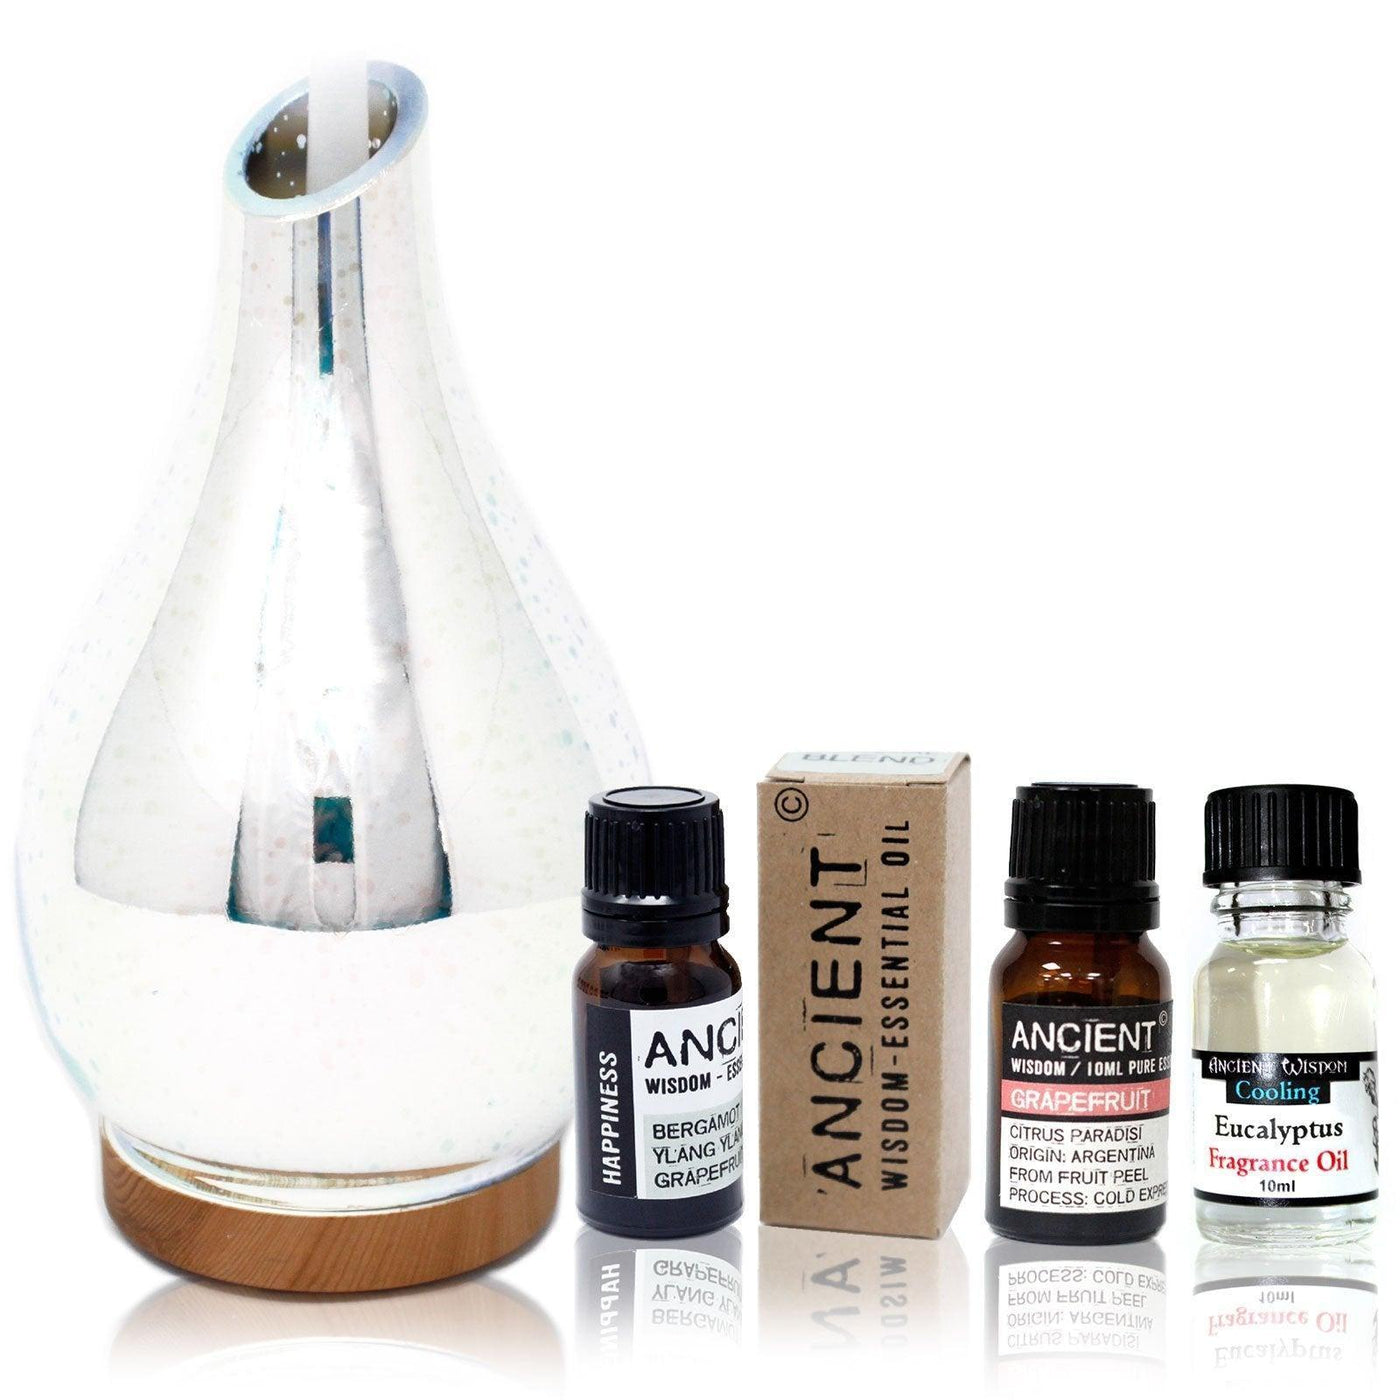 Ibiza Glass Metallic LED Light And Timer Aroma Diffuser And Essential Oils Set.